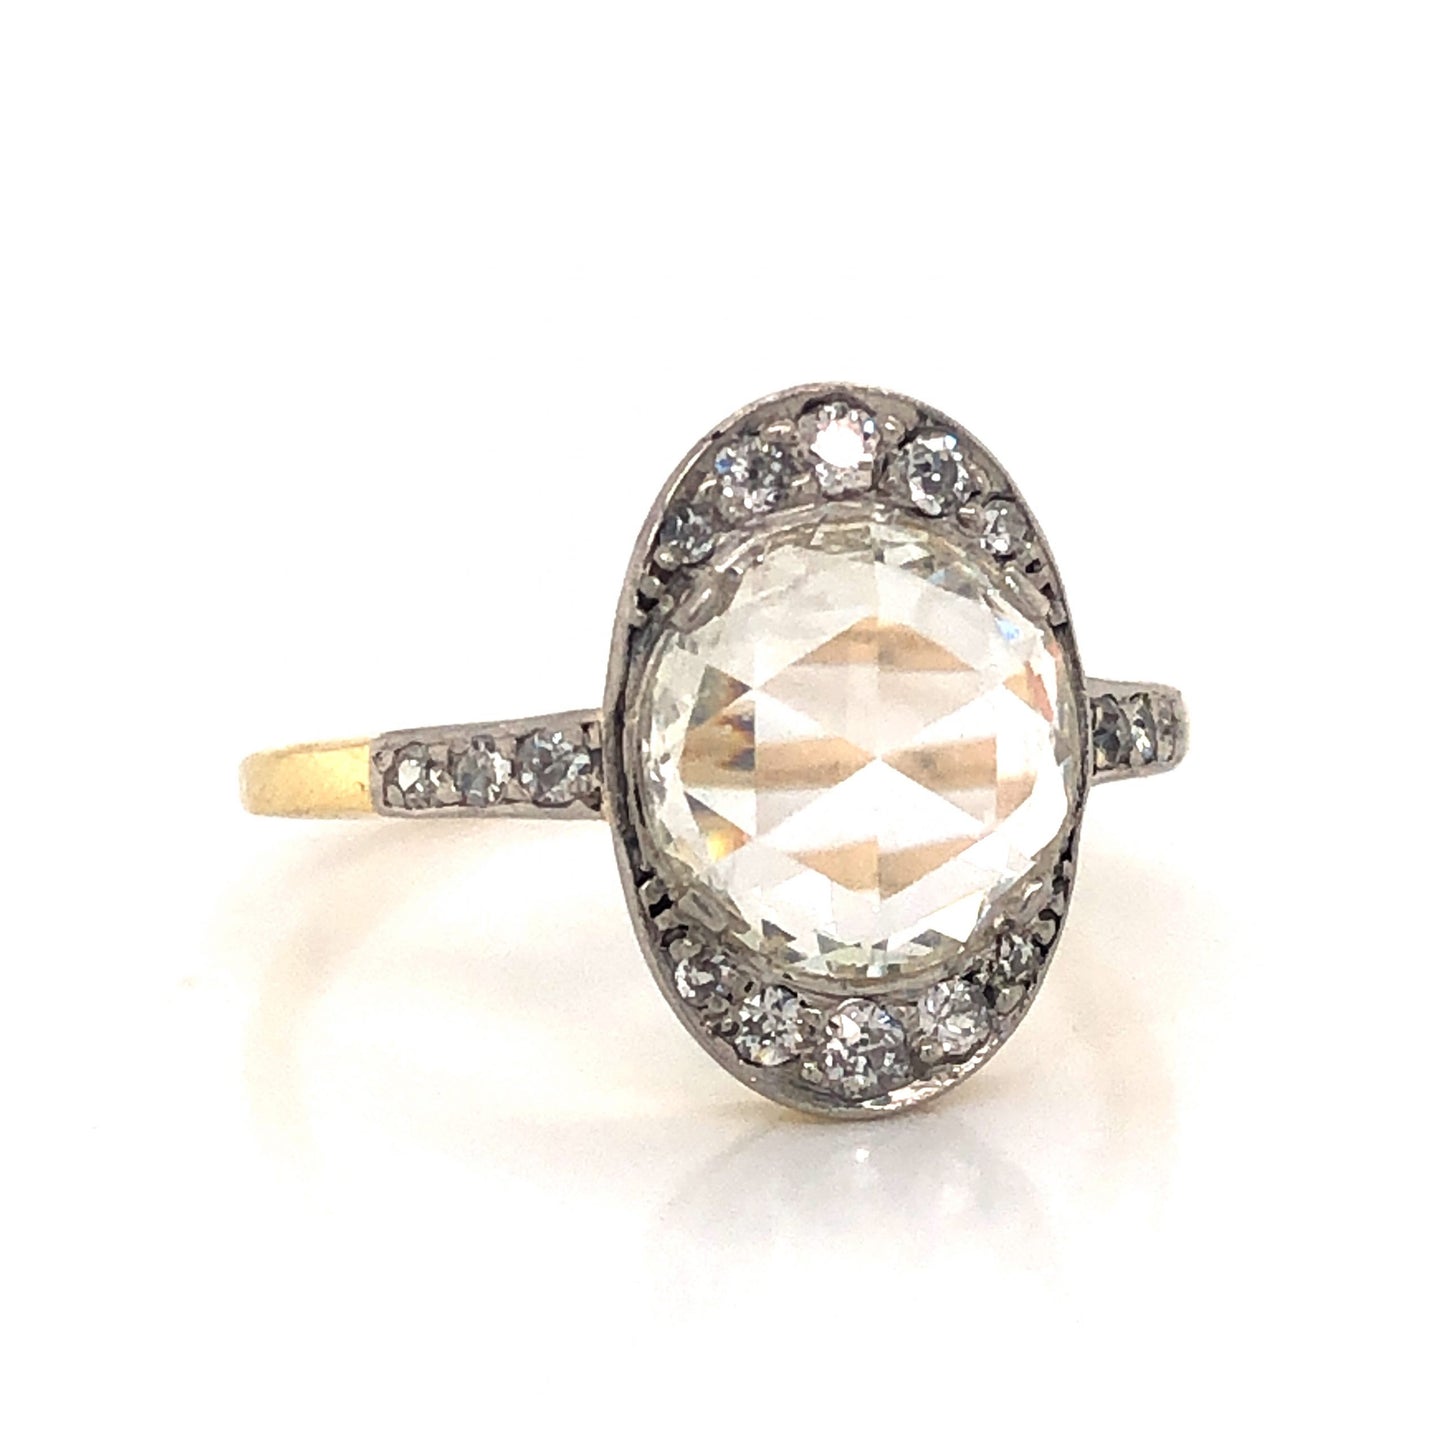 Victorian Round Rose Cut Diamond Engagement Ring in 14k